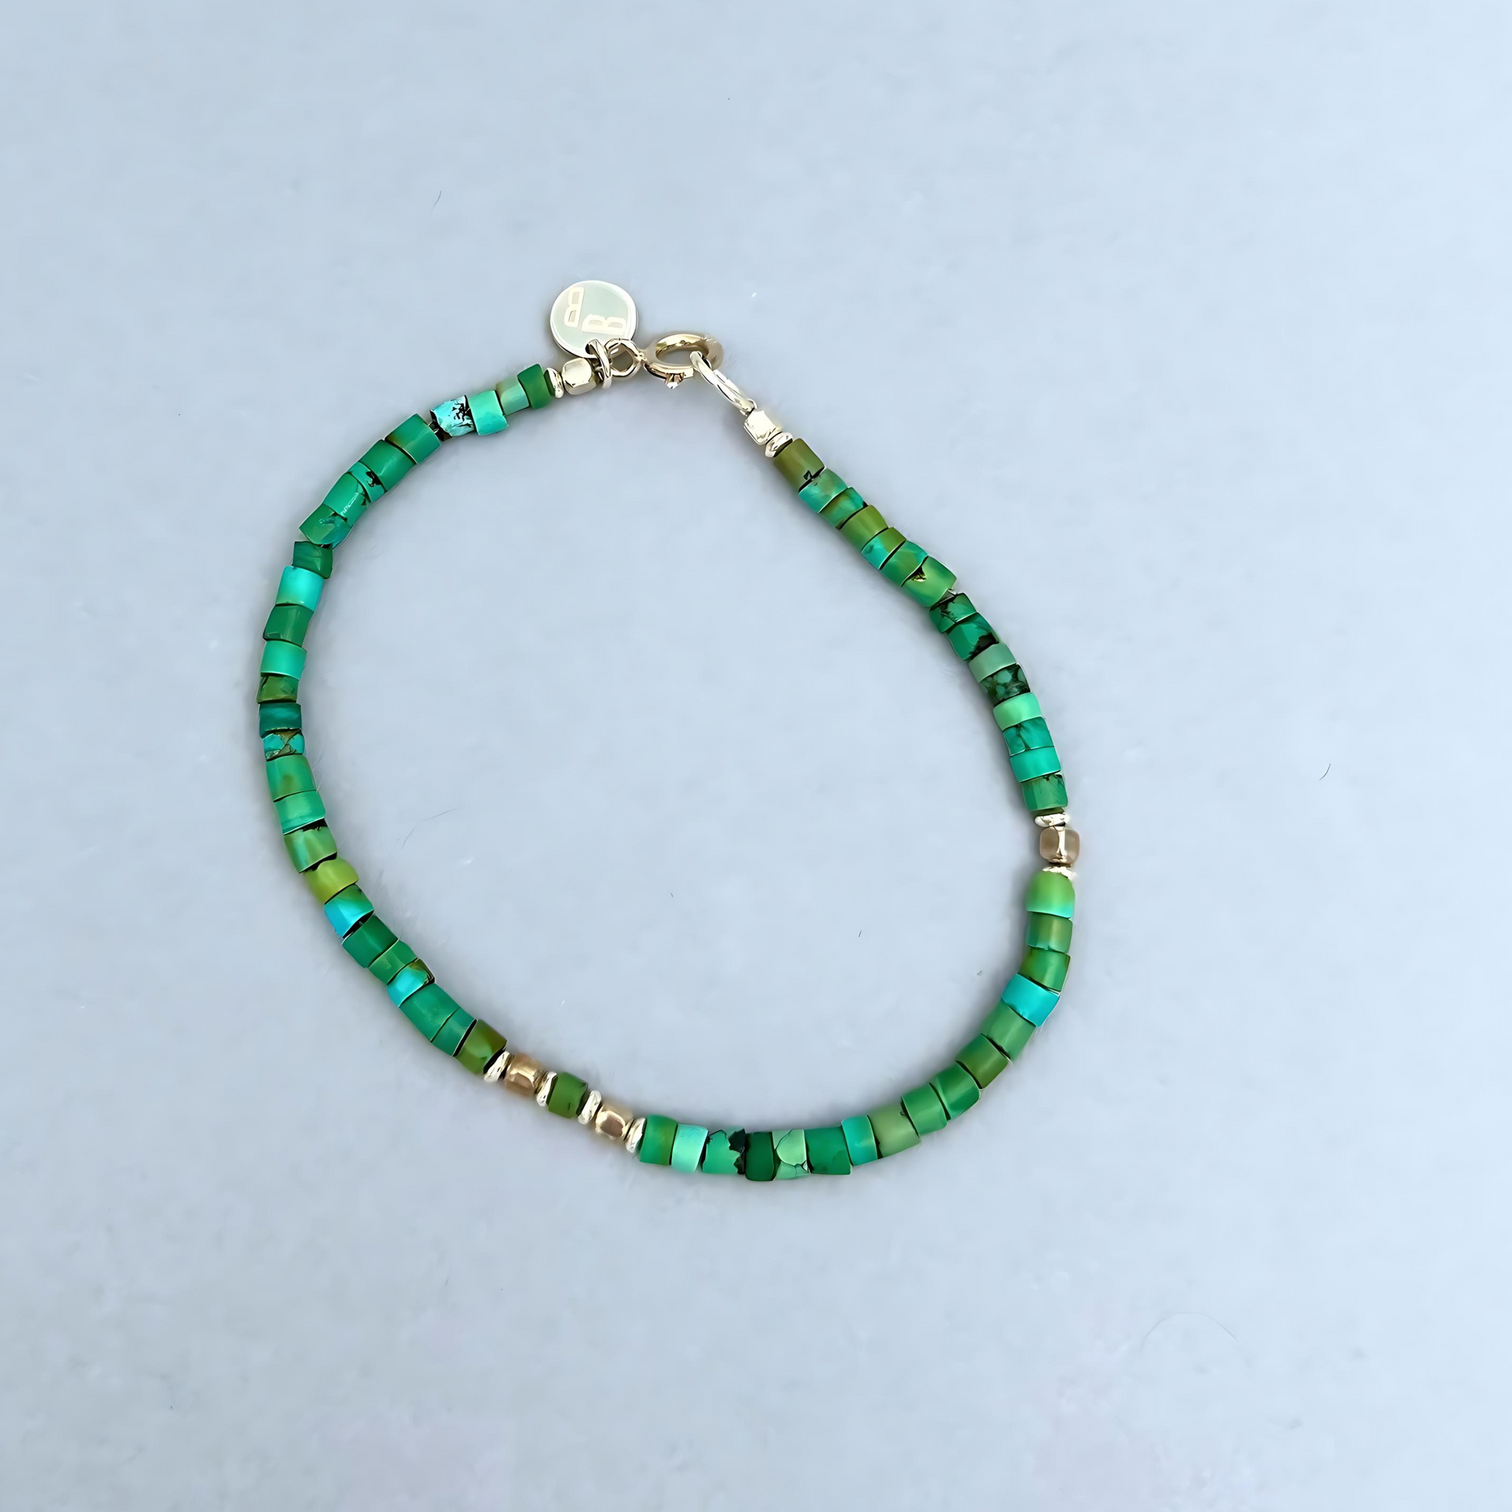 The Le BijouBijou Ocean Green Men's Bracelet is made with Blue-Green Turquoise and a touch of Sterling Silver.